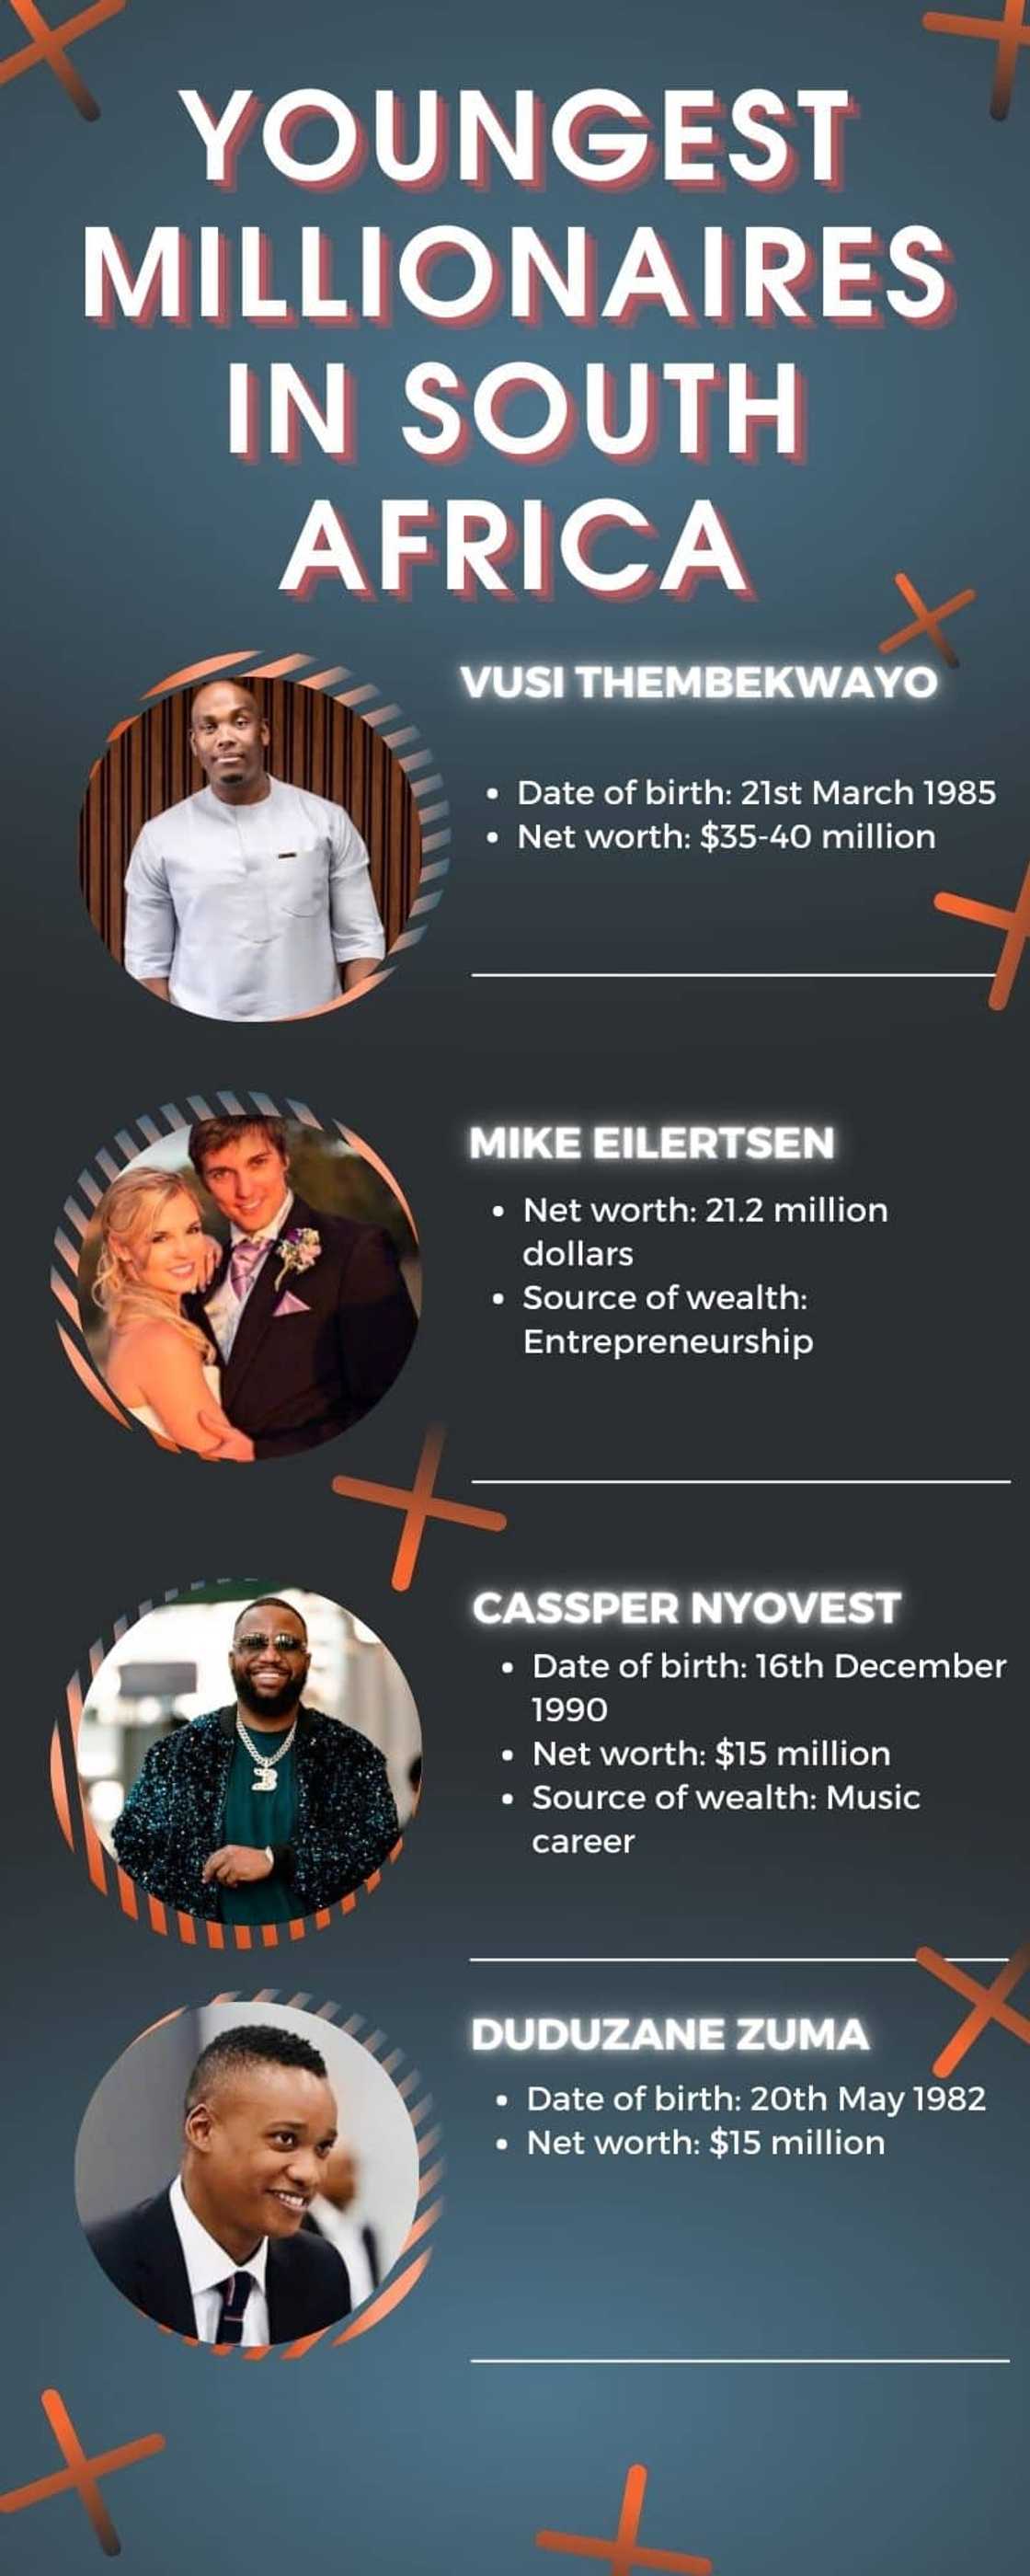 Youngest millionaires in South Africa